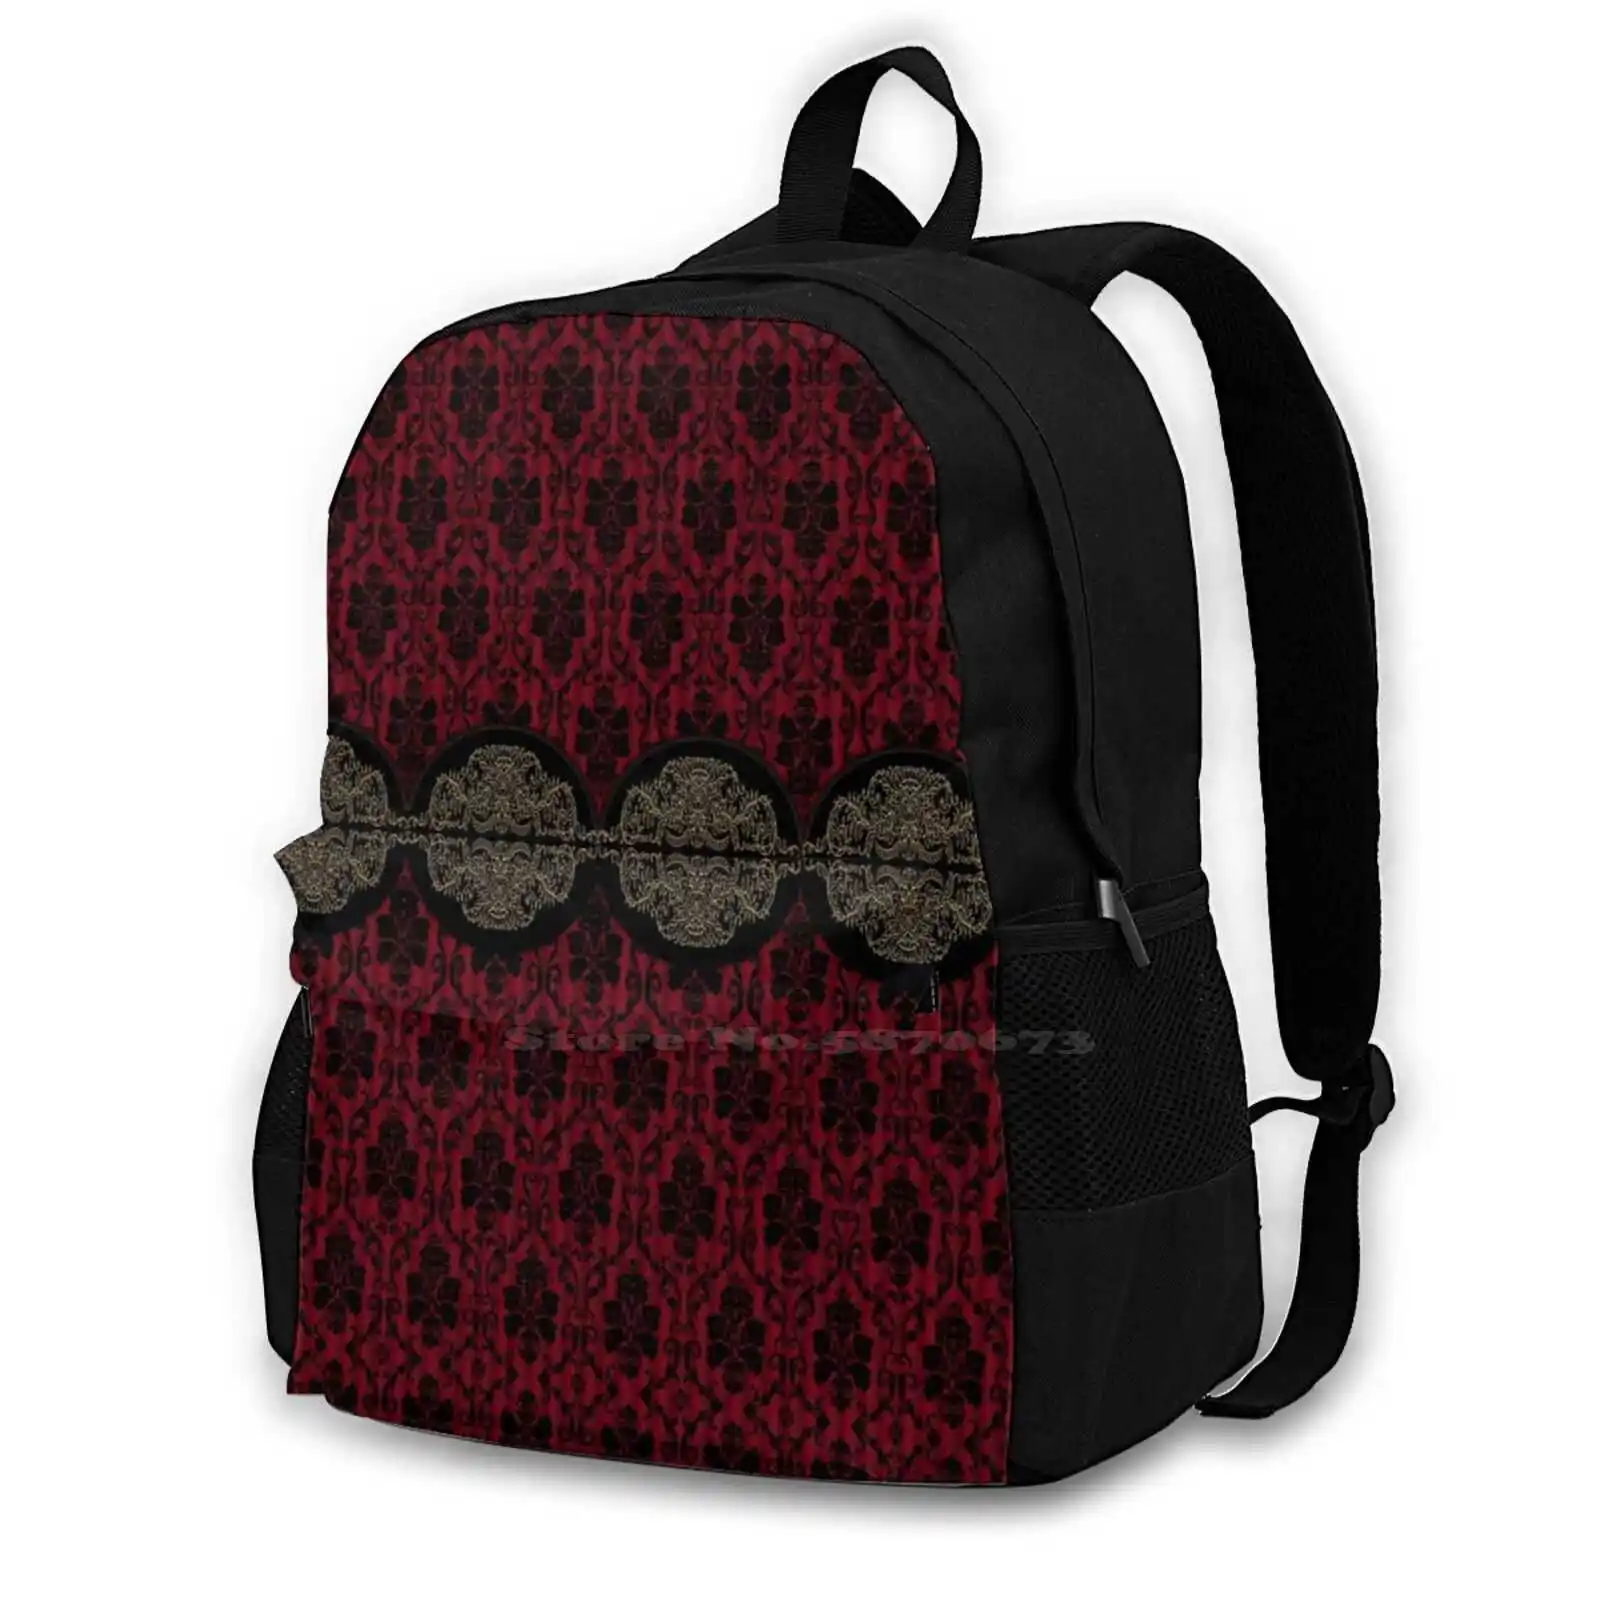 

Red And Black Damask Patterns Large Capacity School Backpack Laptop Travel Bags Arabesque Pattern Mosaic Style Al Abstract Arc